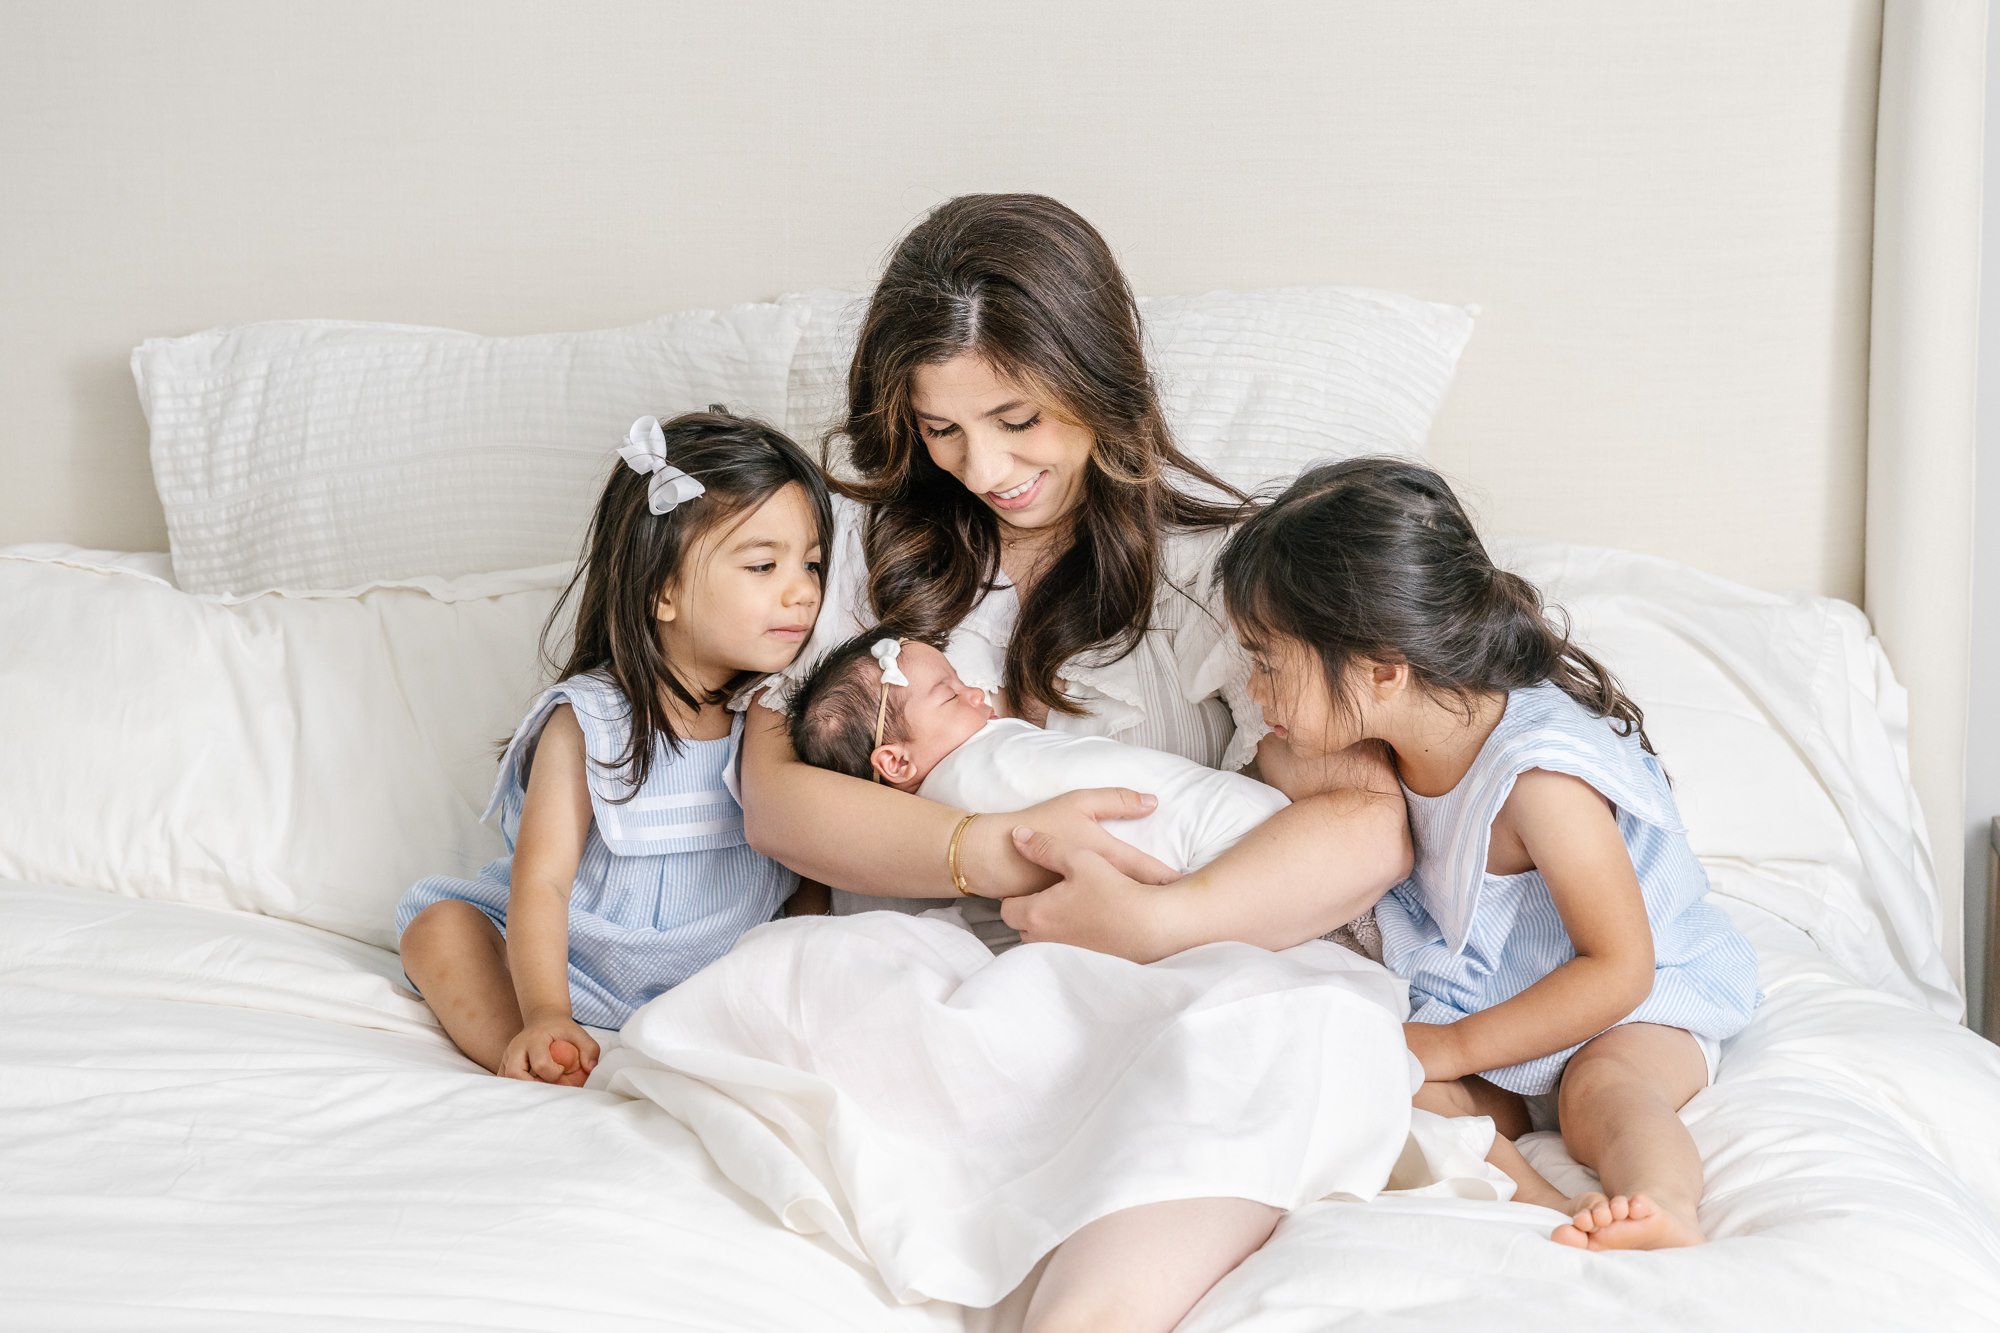  Mom snuggling up in bed holding her newborn daughter while her other two daughters cuddle up next to her and baby sister. #newyorkcityphotographer #familyportraits #newbornportraitsession #inhomephotography #familyoffive #familyposeinspo #newjerseyf